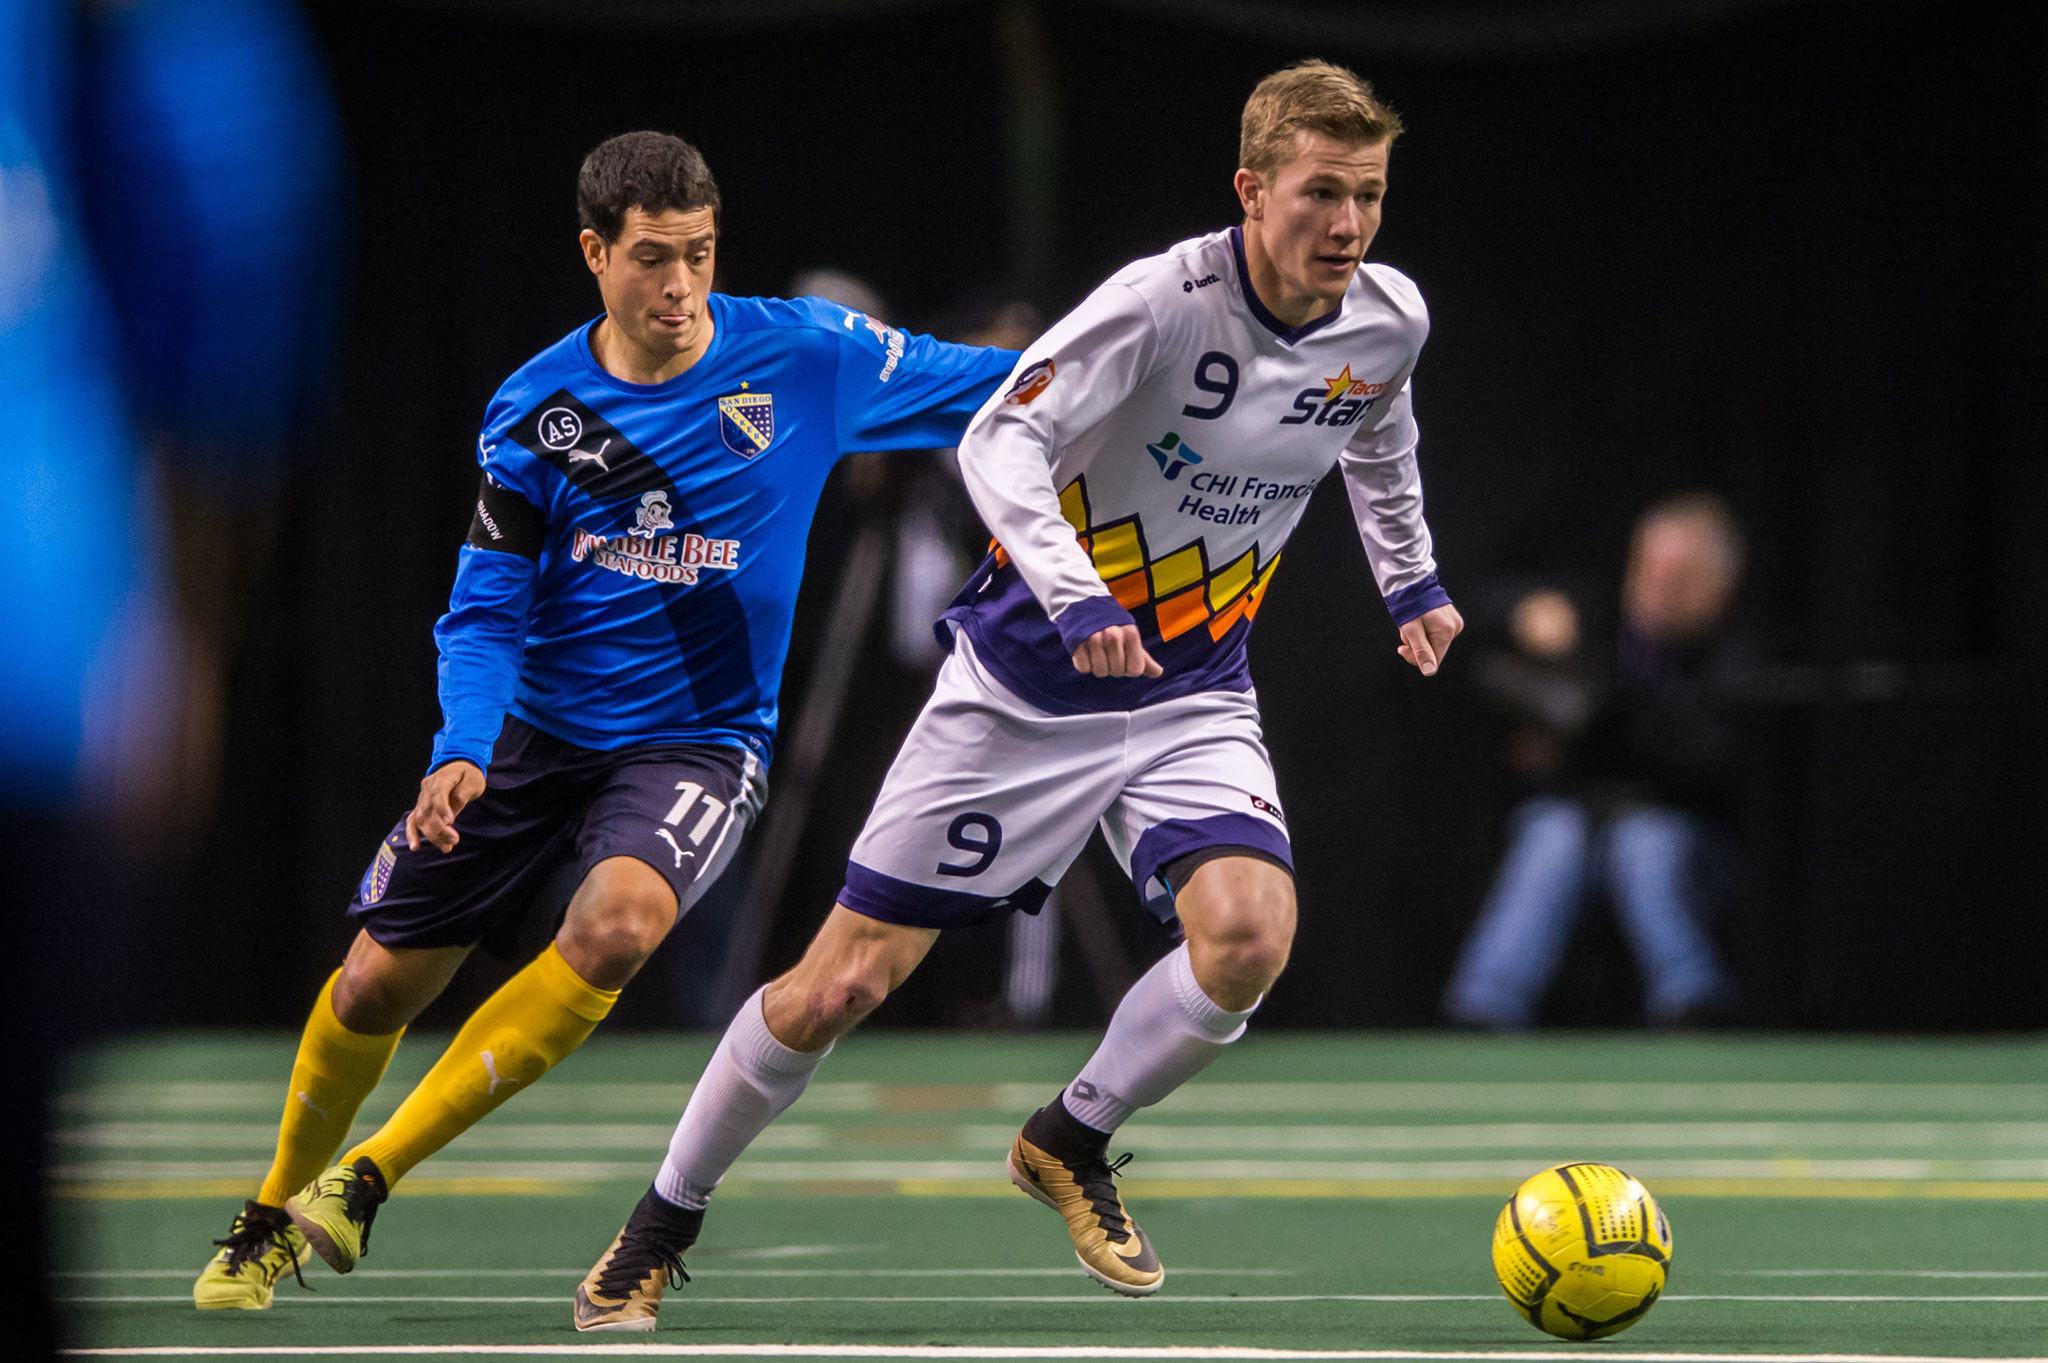 The Stars’ Derek Johnson brings the ball upfield with the Shockers’ Luan Oliveira in pursuit during a match last year in Kent. COURTESY PHOTO, Wilson Tsoi, Tacoma Stars